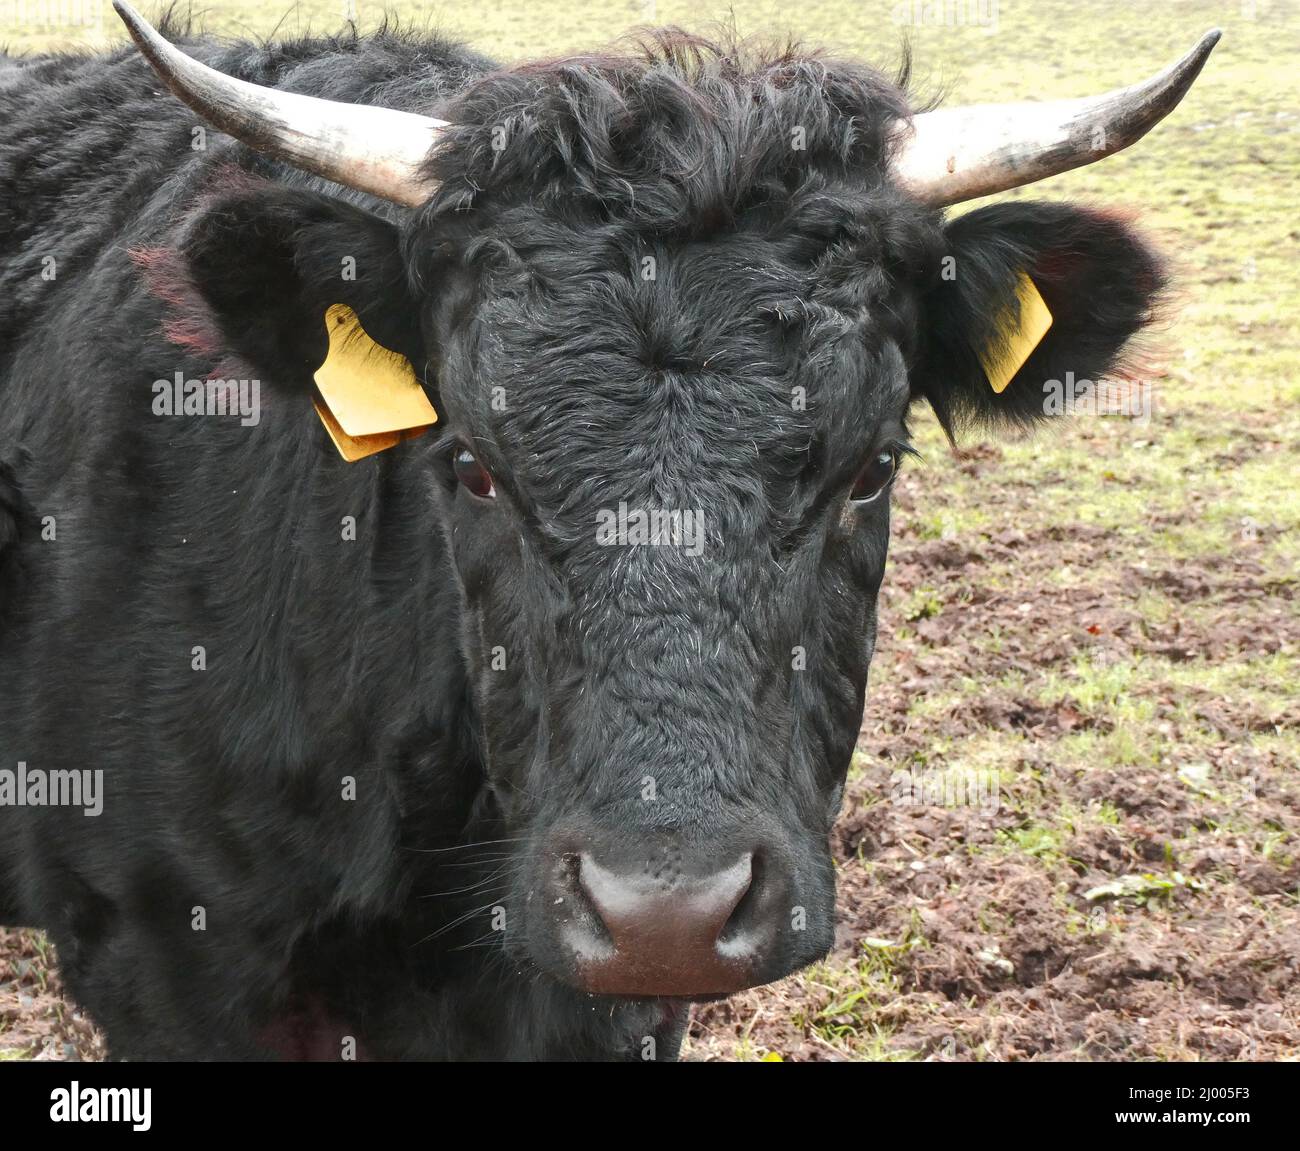 Portrait of a black cow with horns. Dexter cattle is originating in Ireland. Dexters are a small, friendly, dual-purpose breed Stock Photo